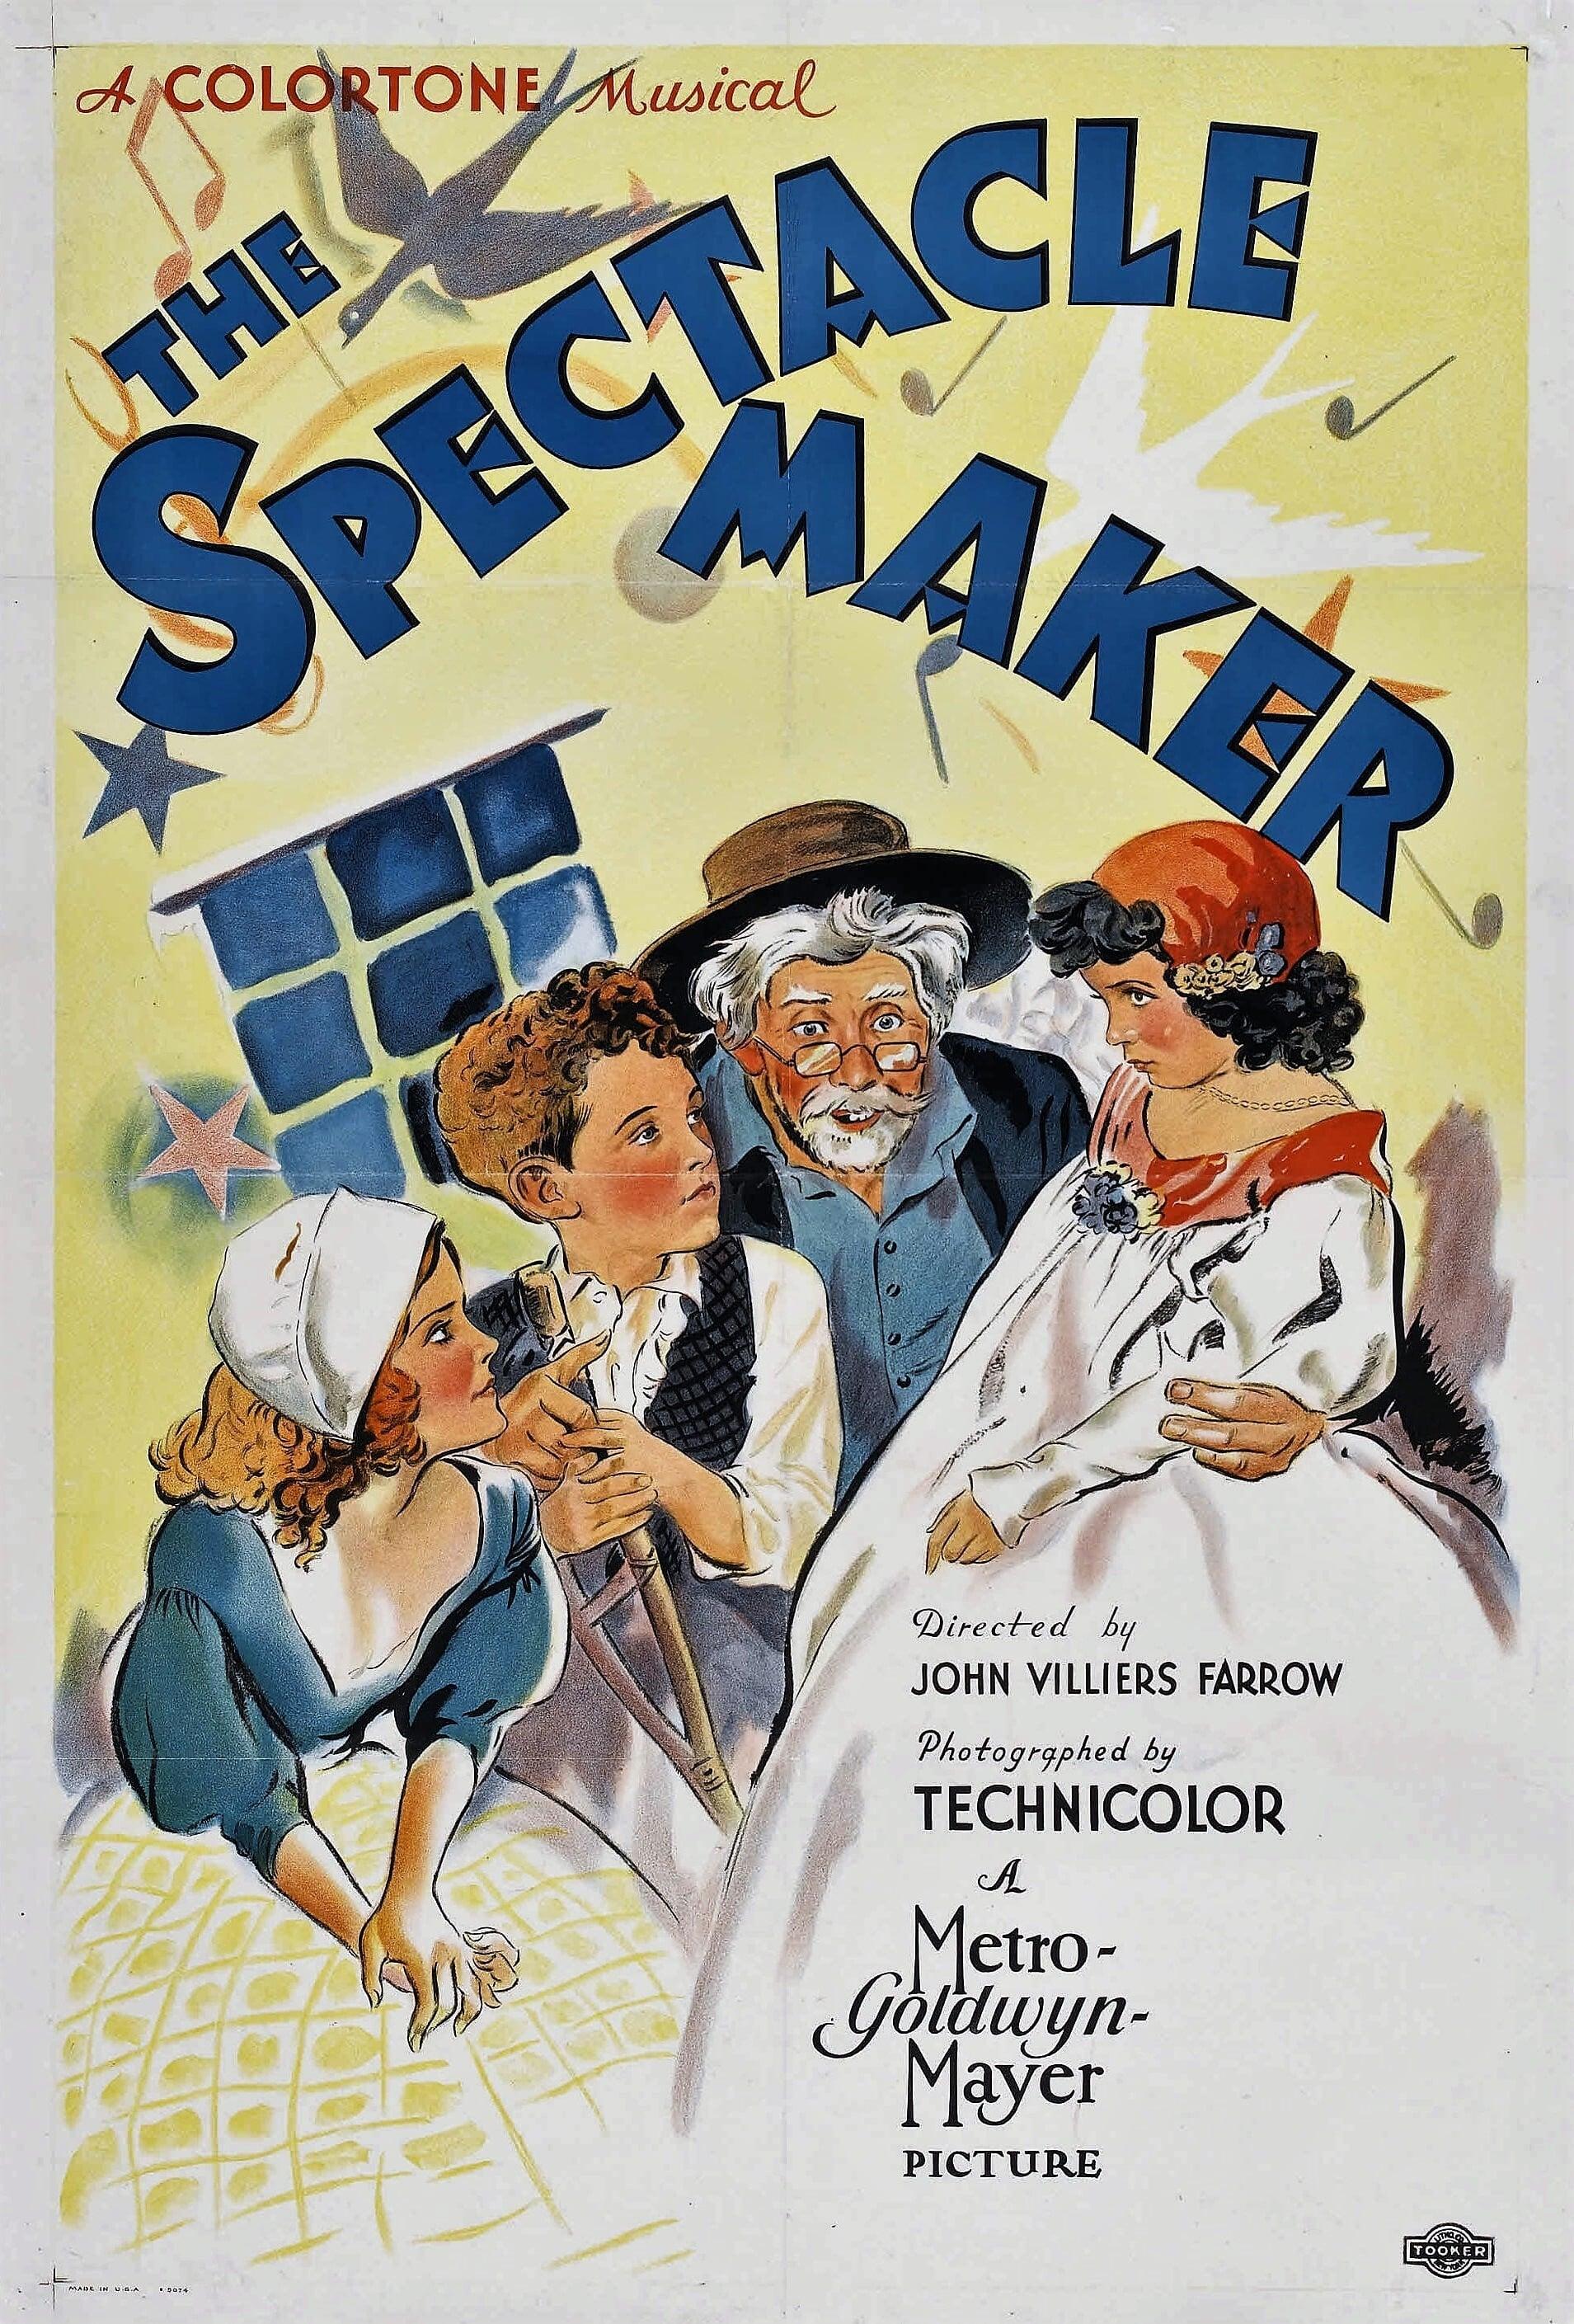 The Spectacle Maker poster